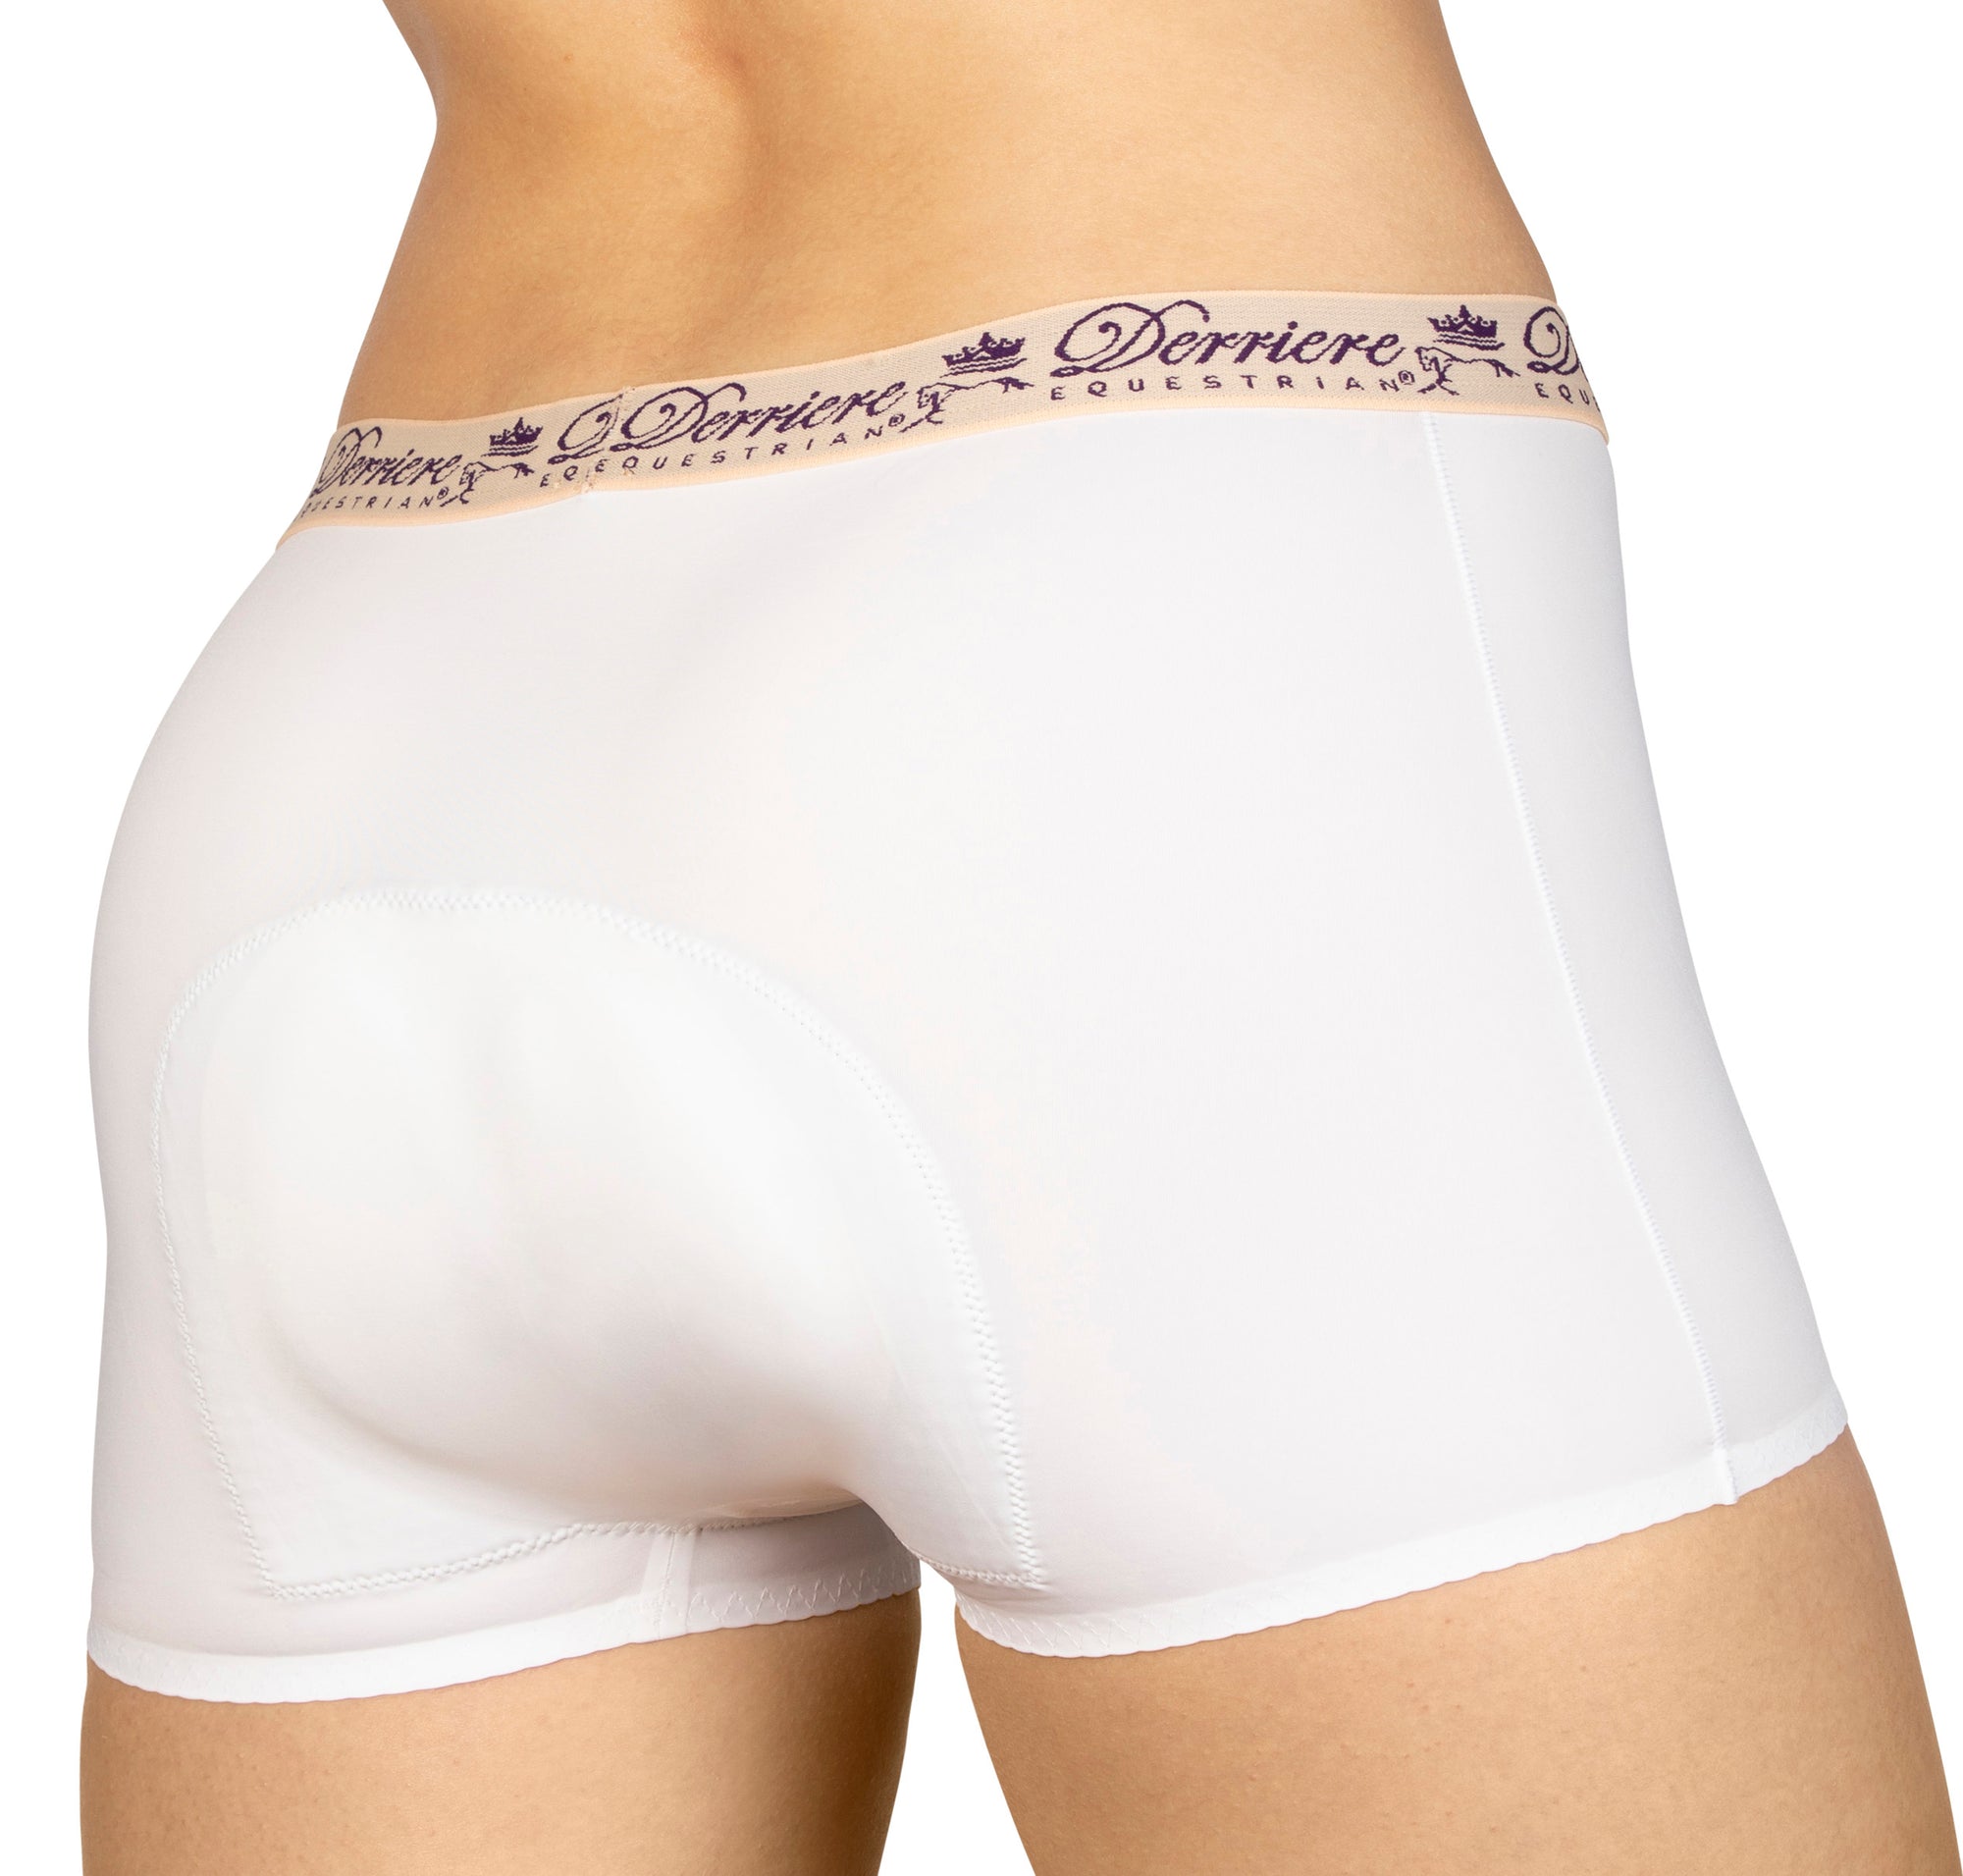 Derrière Equestrian Performance Padded Shorty